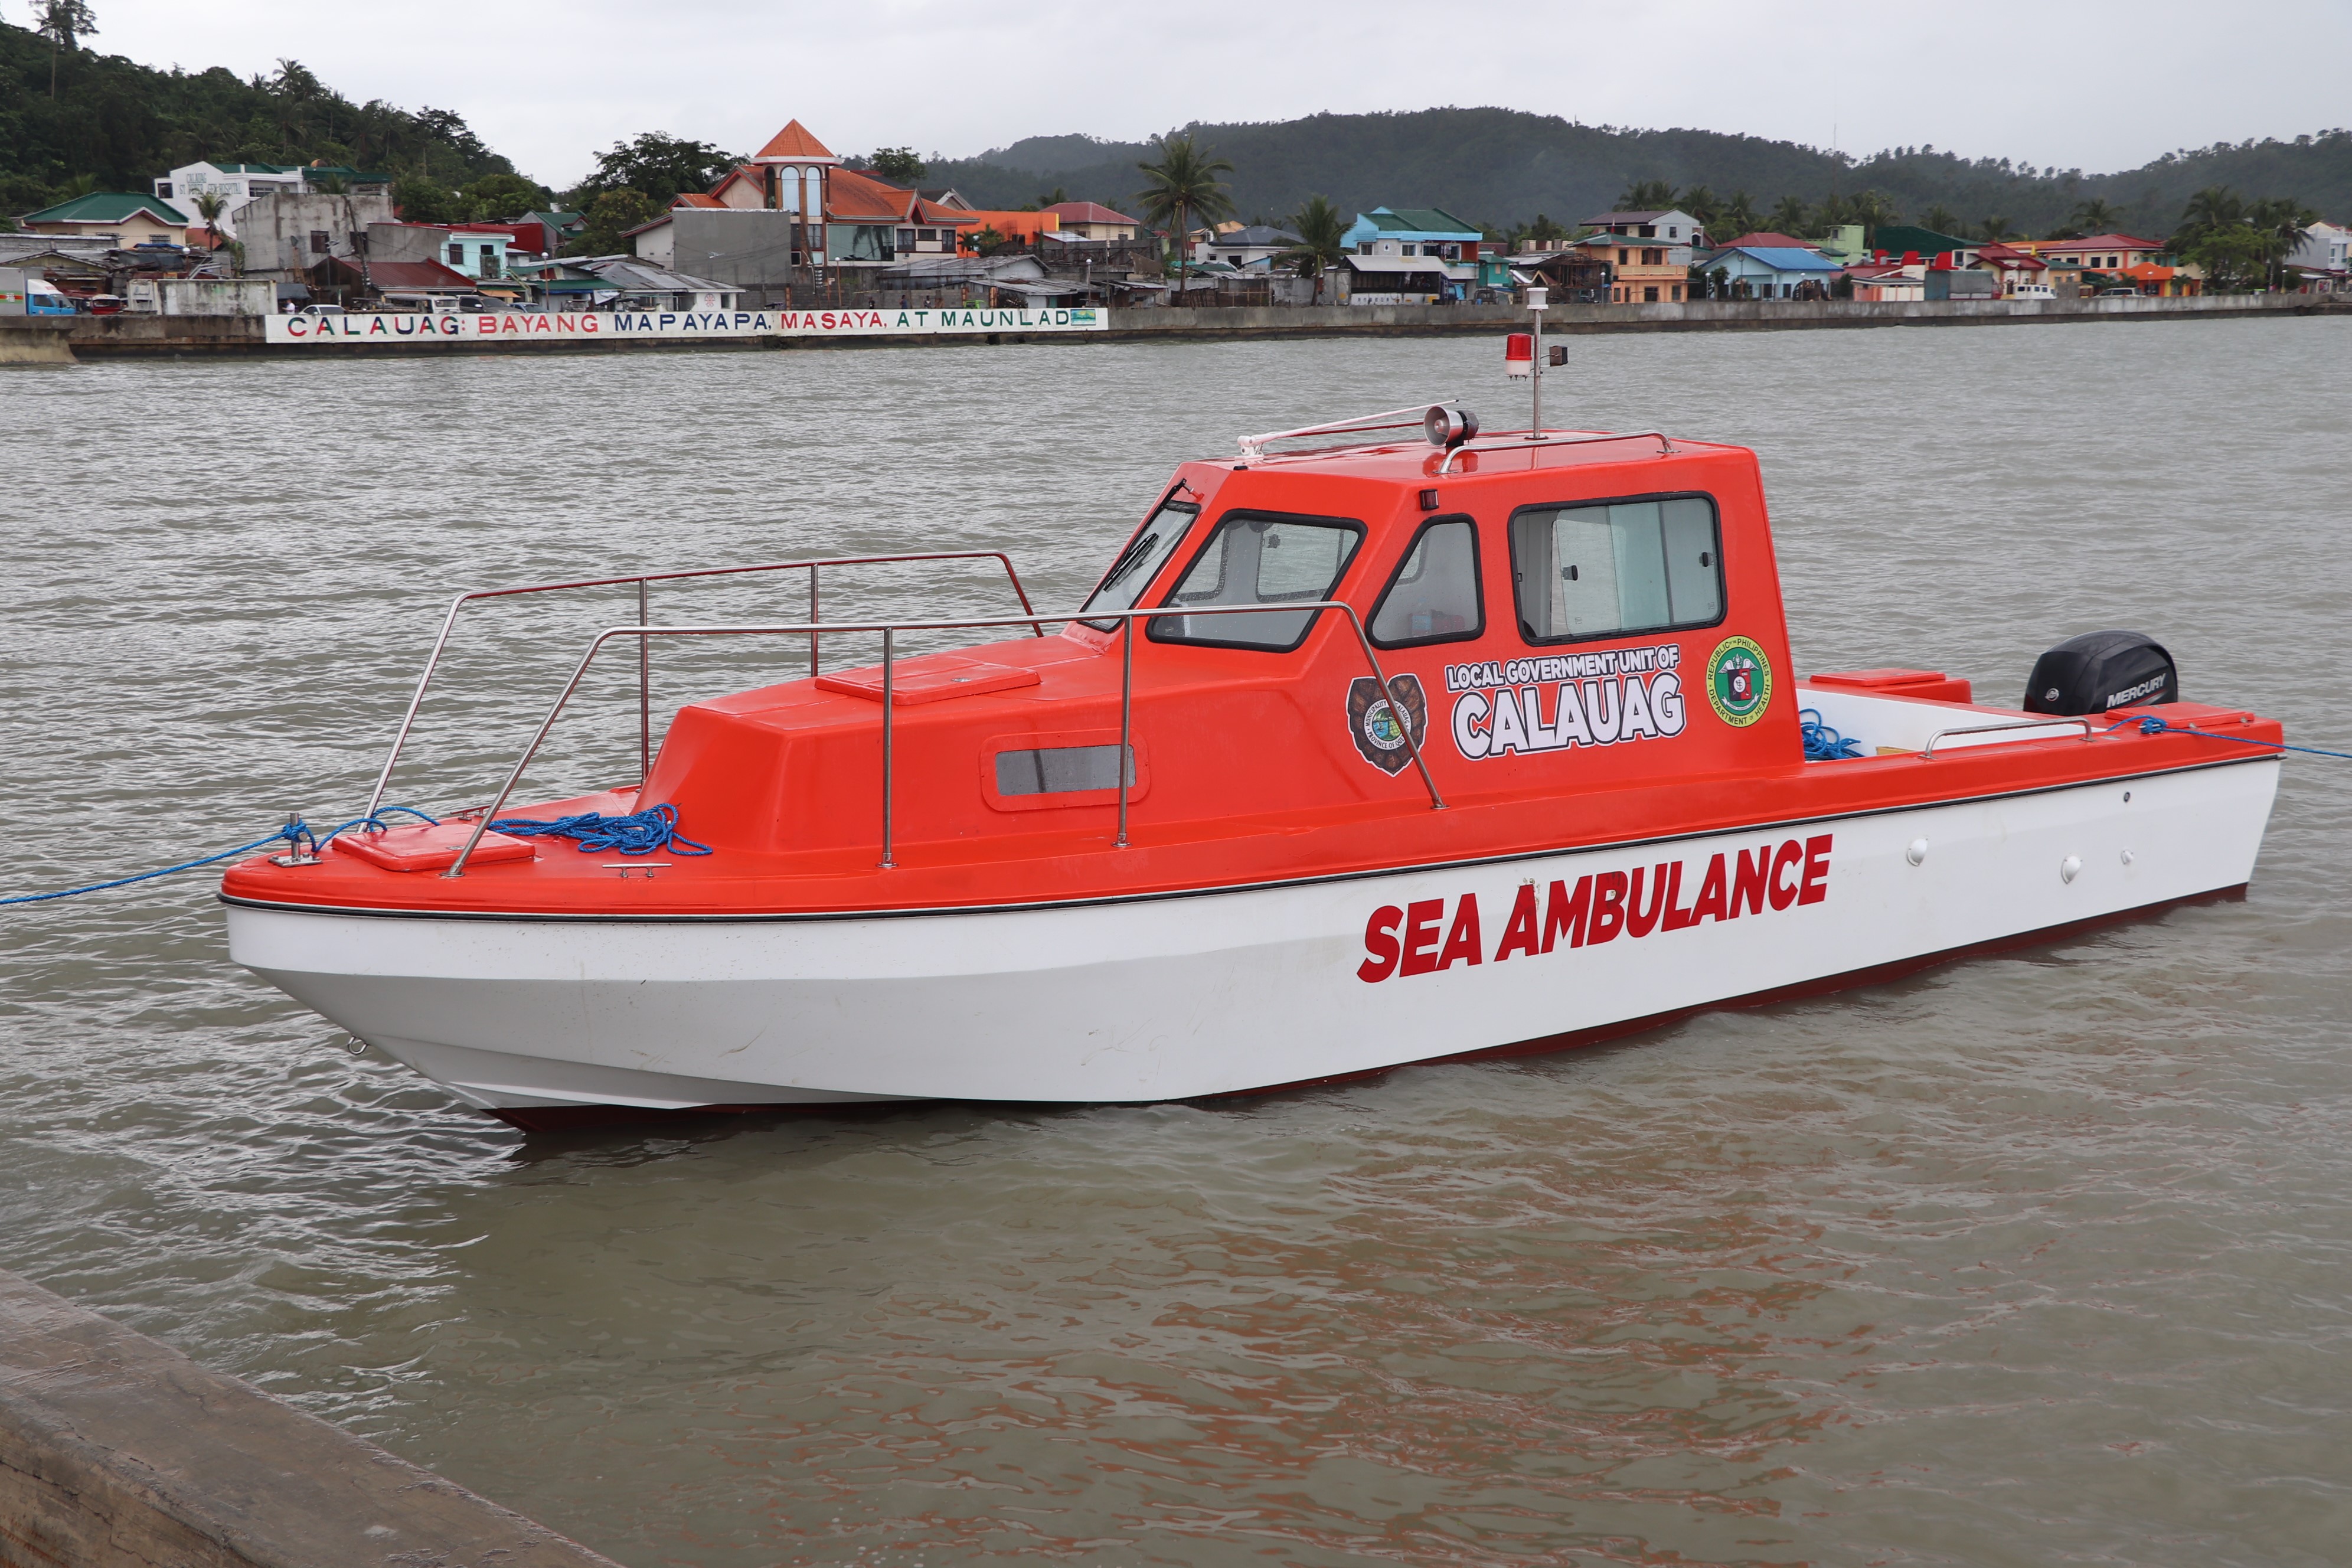 SEA AMBULANCE. This is the sea ambulance donated by DOH-CALABARZON to the municipality of Calauag, Quezon on February 28, 2020. Photo from DOH-CALABARZON 